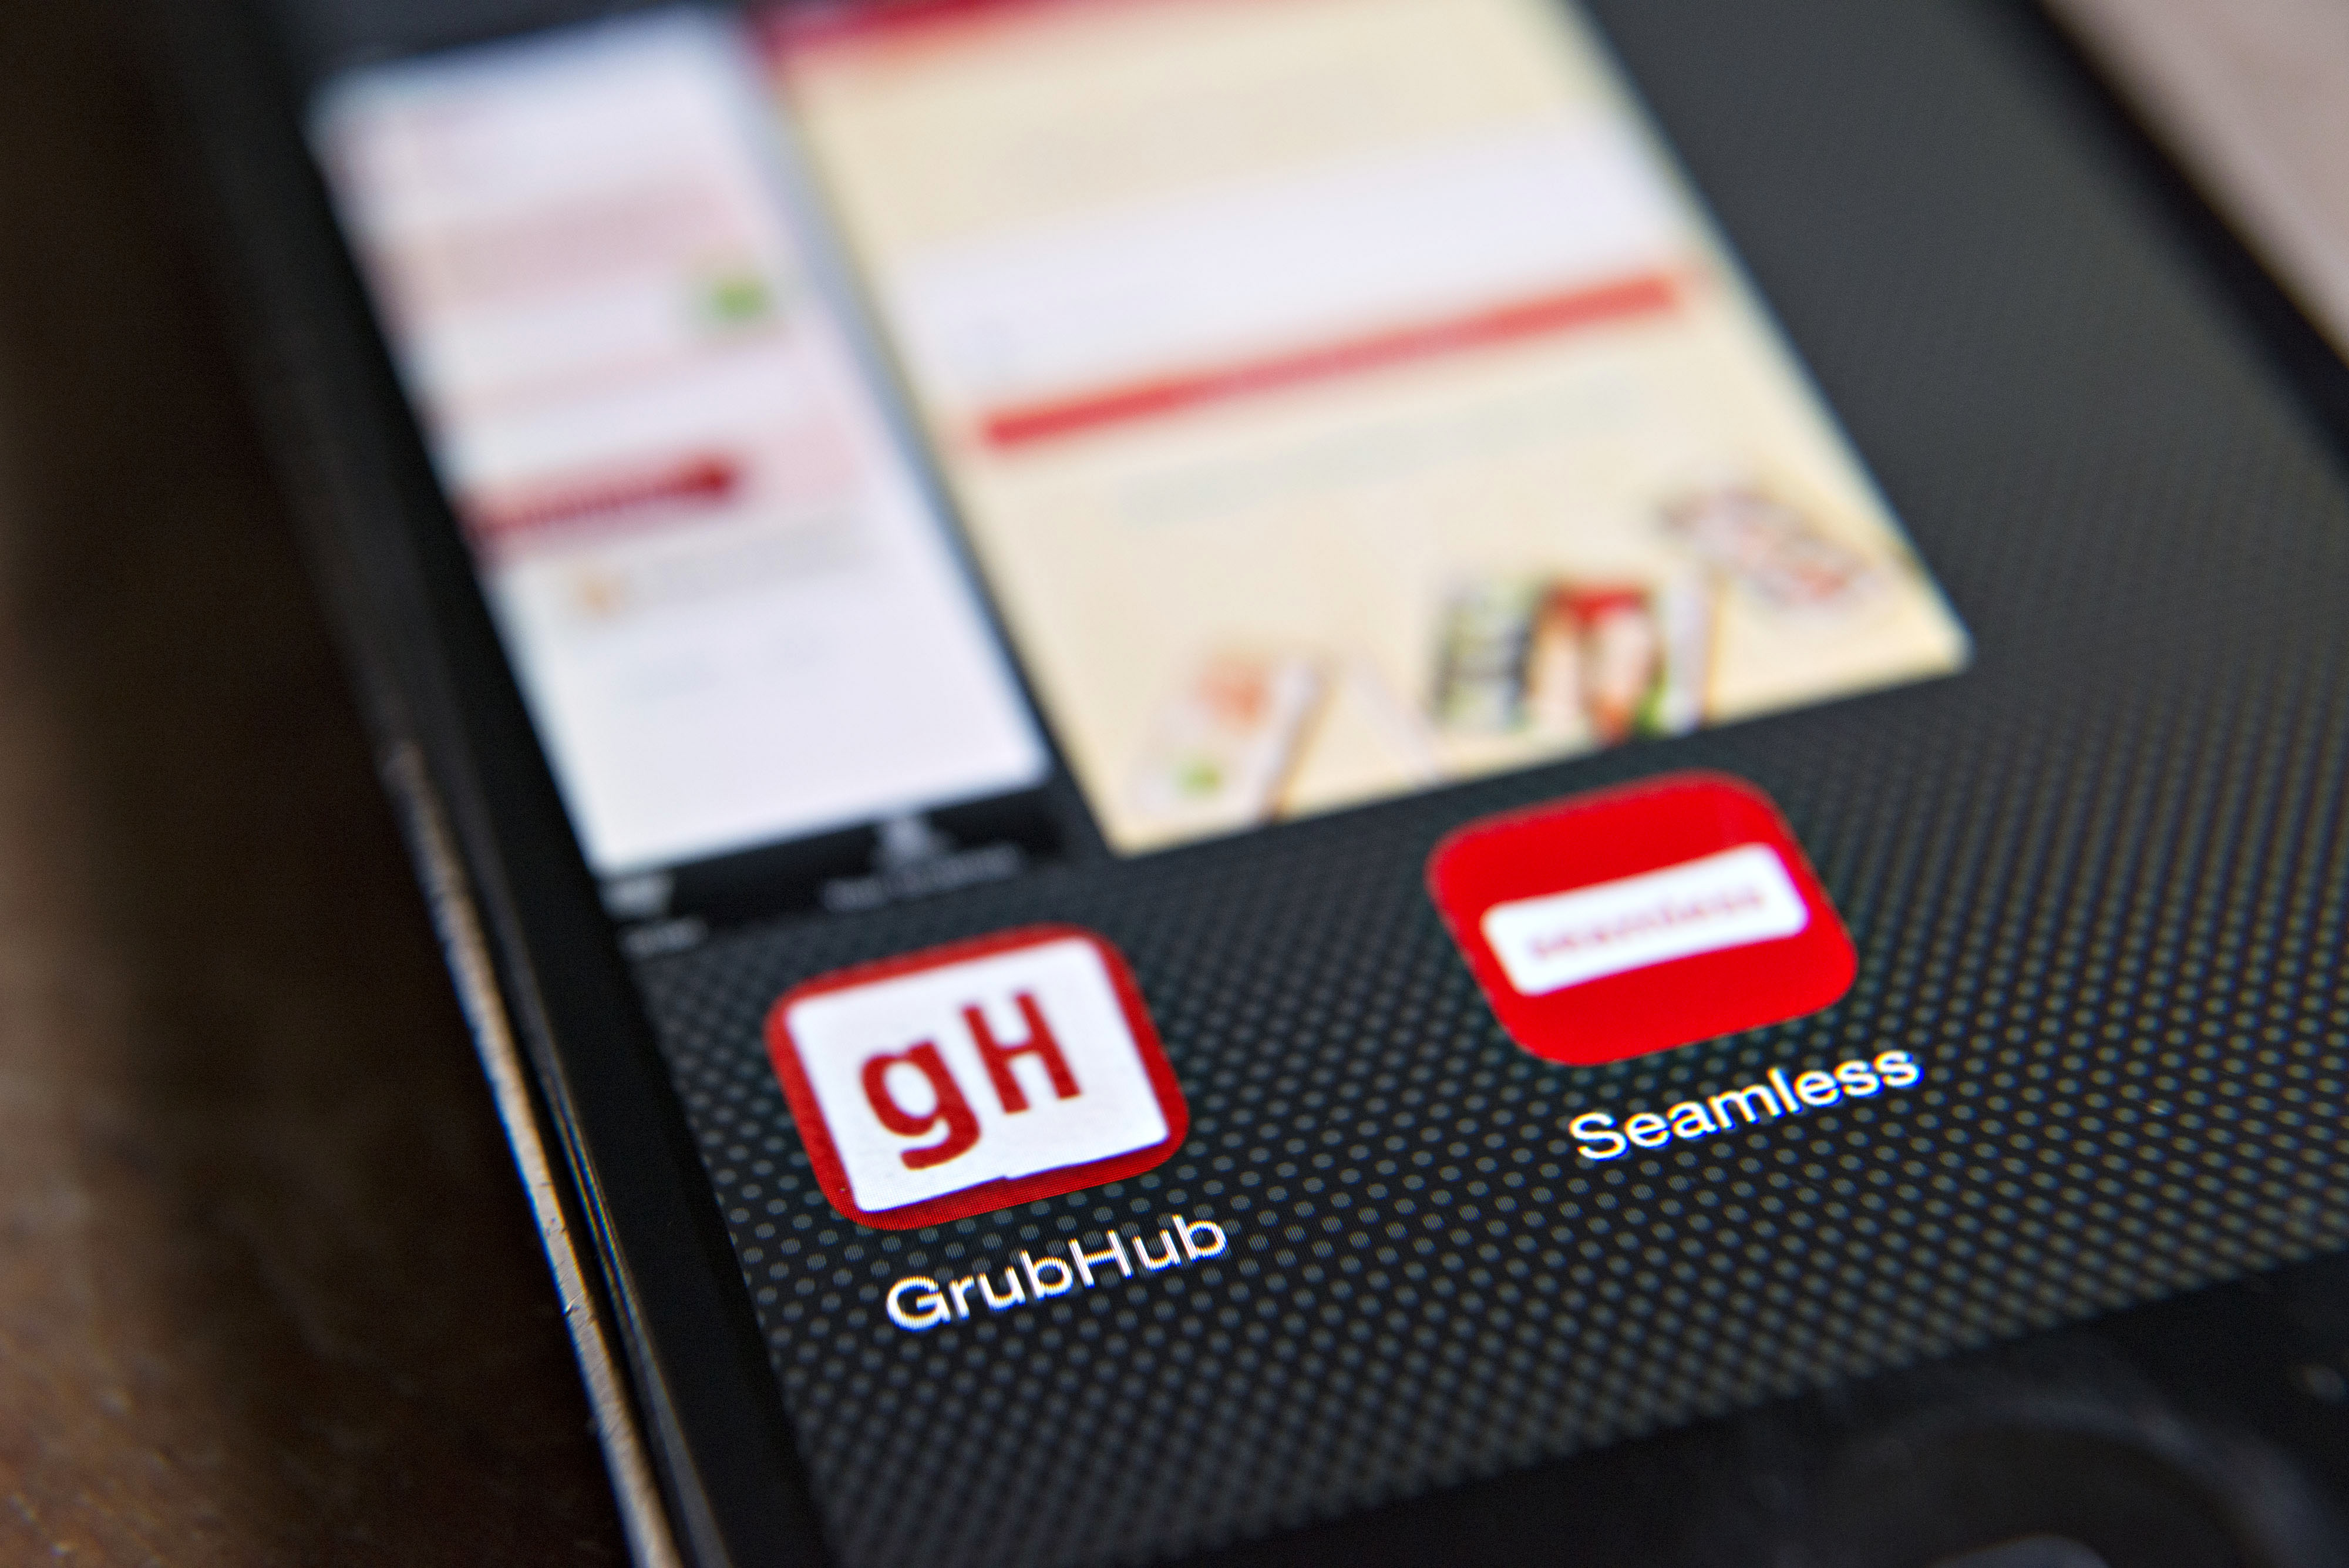 Primes NYC Food Delivery Market by Investing in Seamless and Grubhub